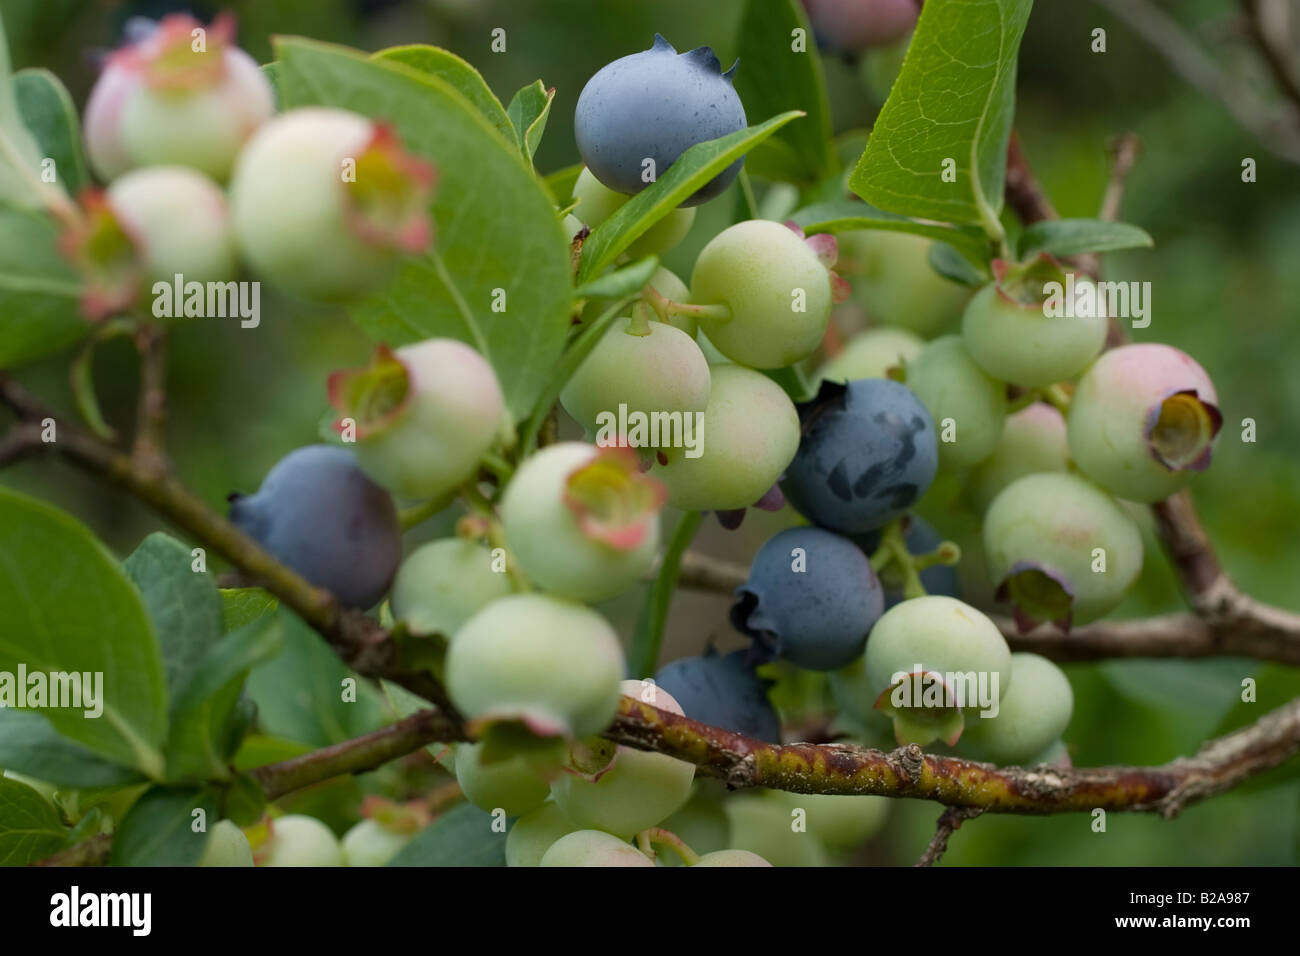 Bunch of blueberries with ripe and unripe berries growing in Vermont Stock Photo